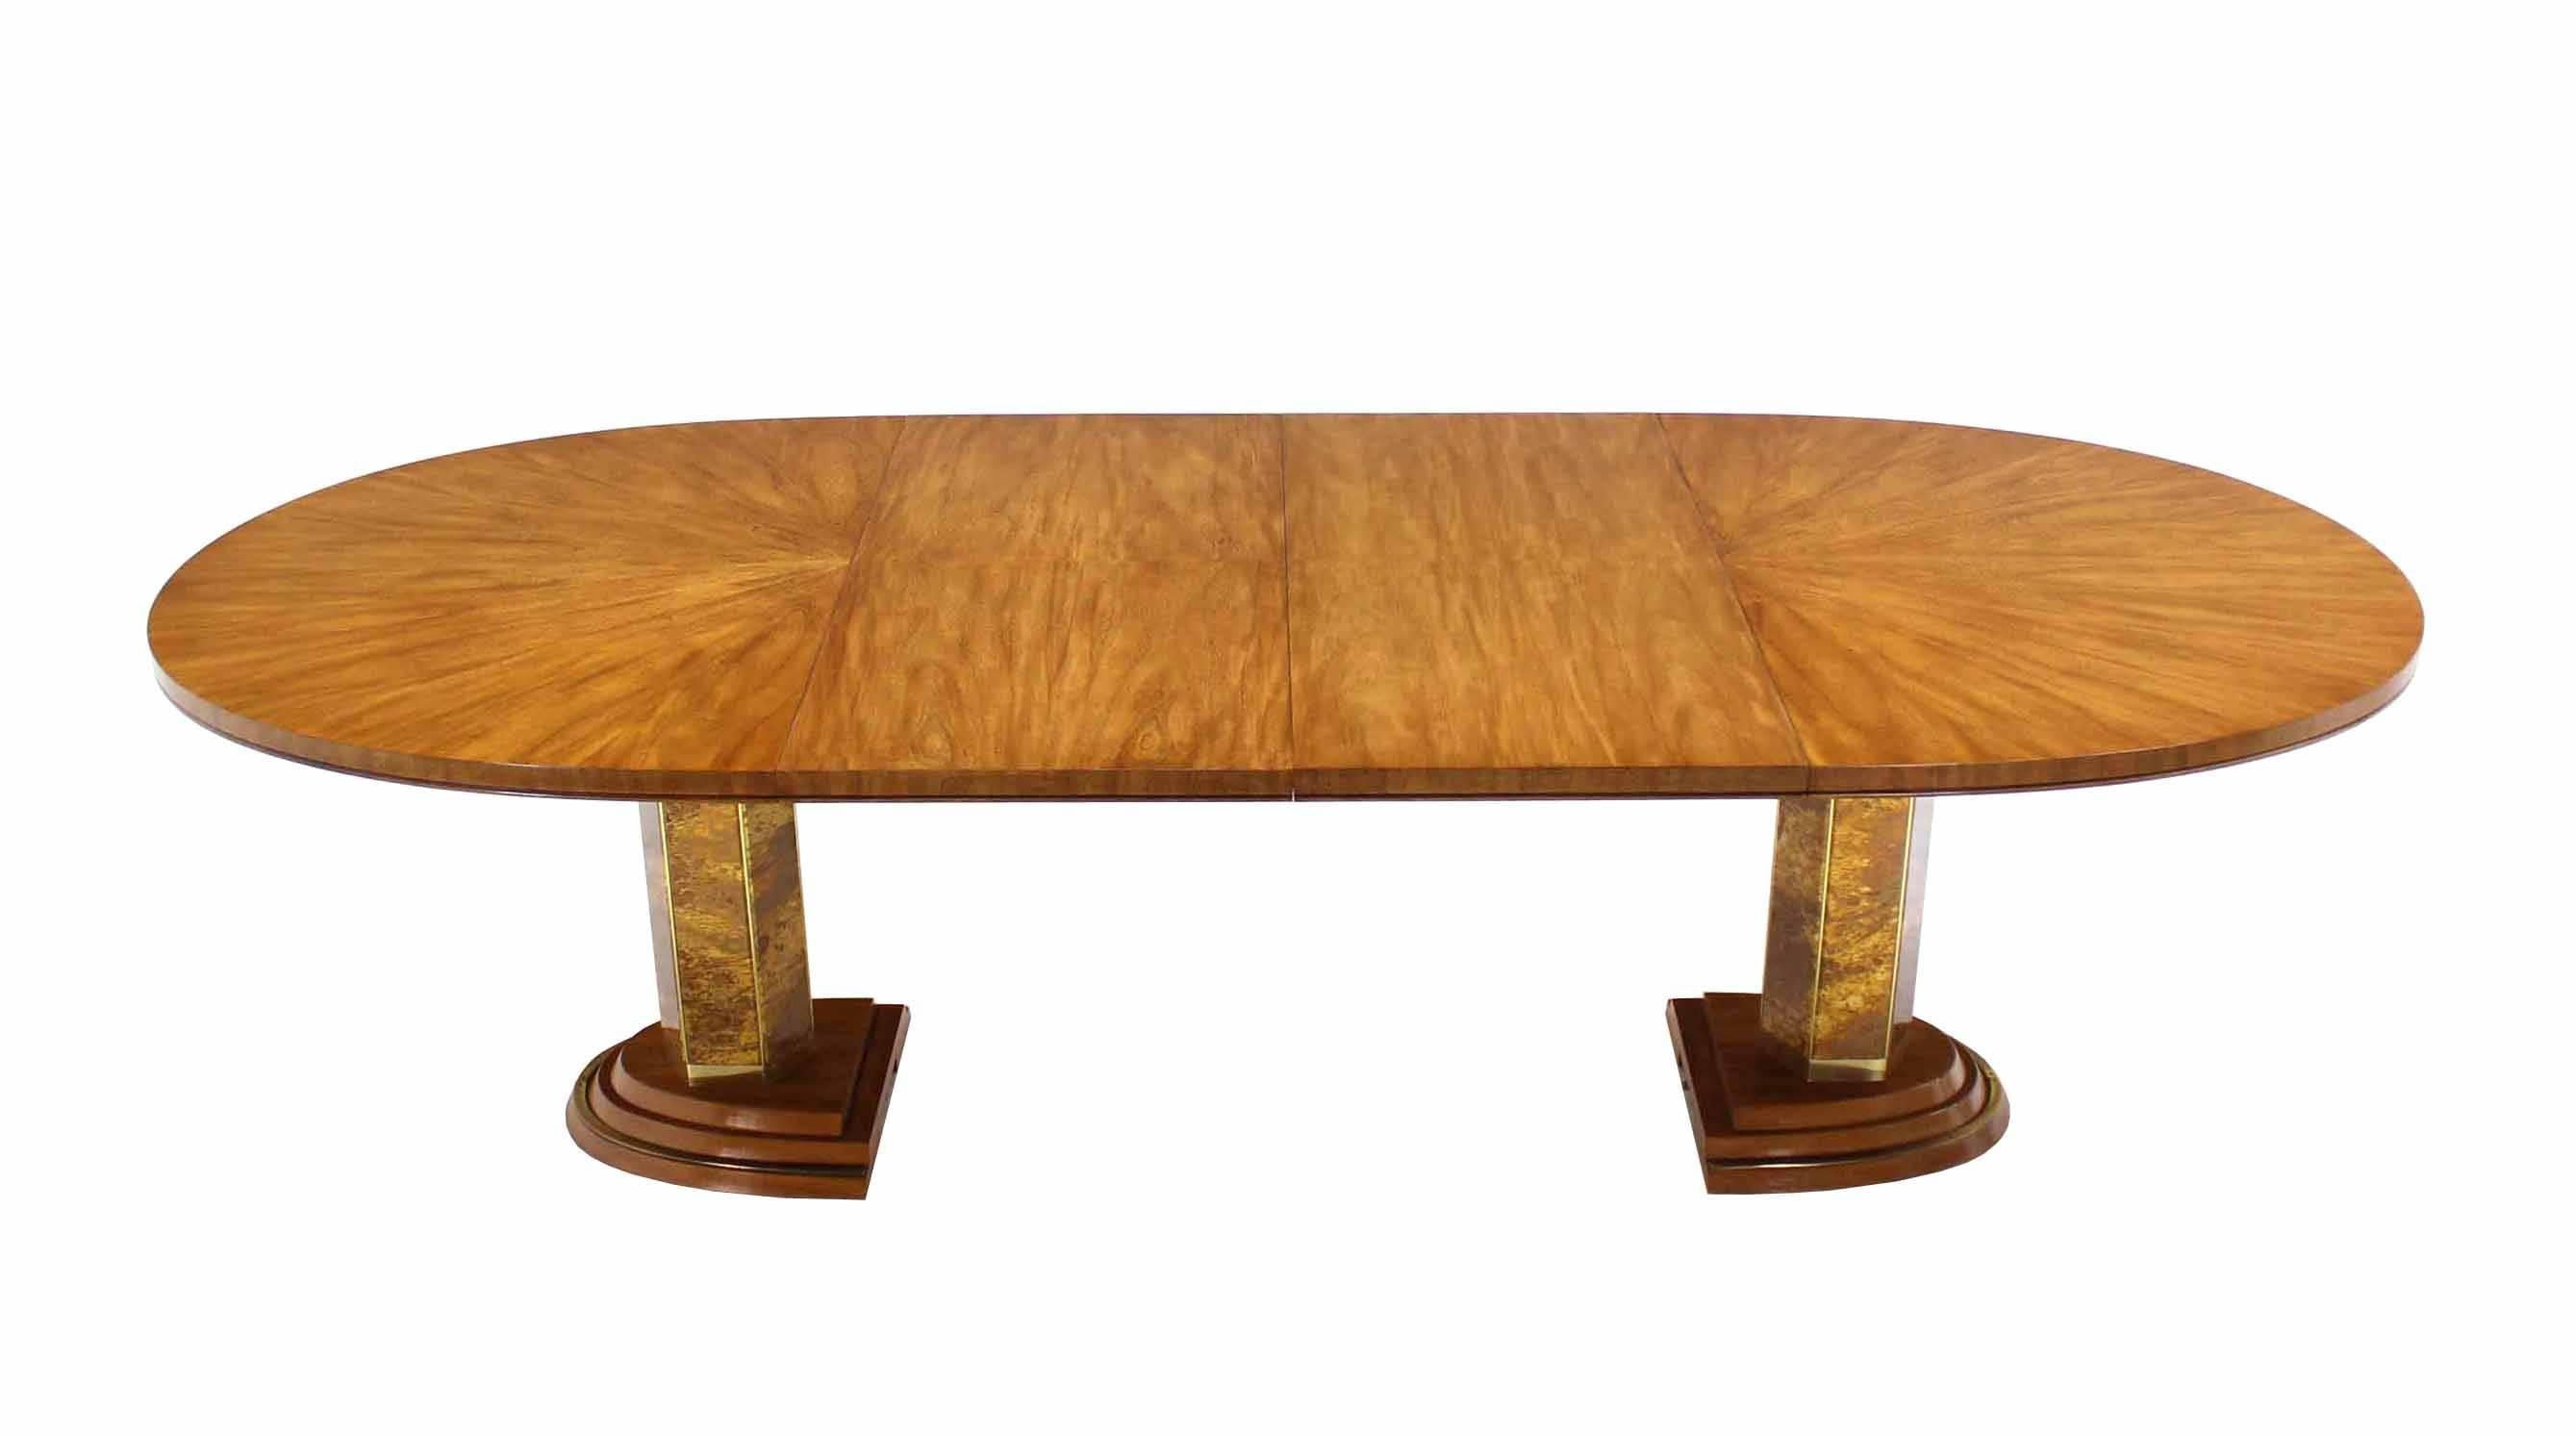 Very nice Mid-Century Modern dining table by Drexel with 2 x 20" leaves.